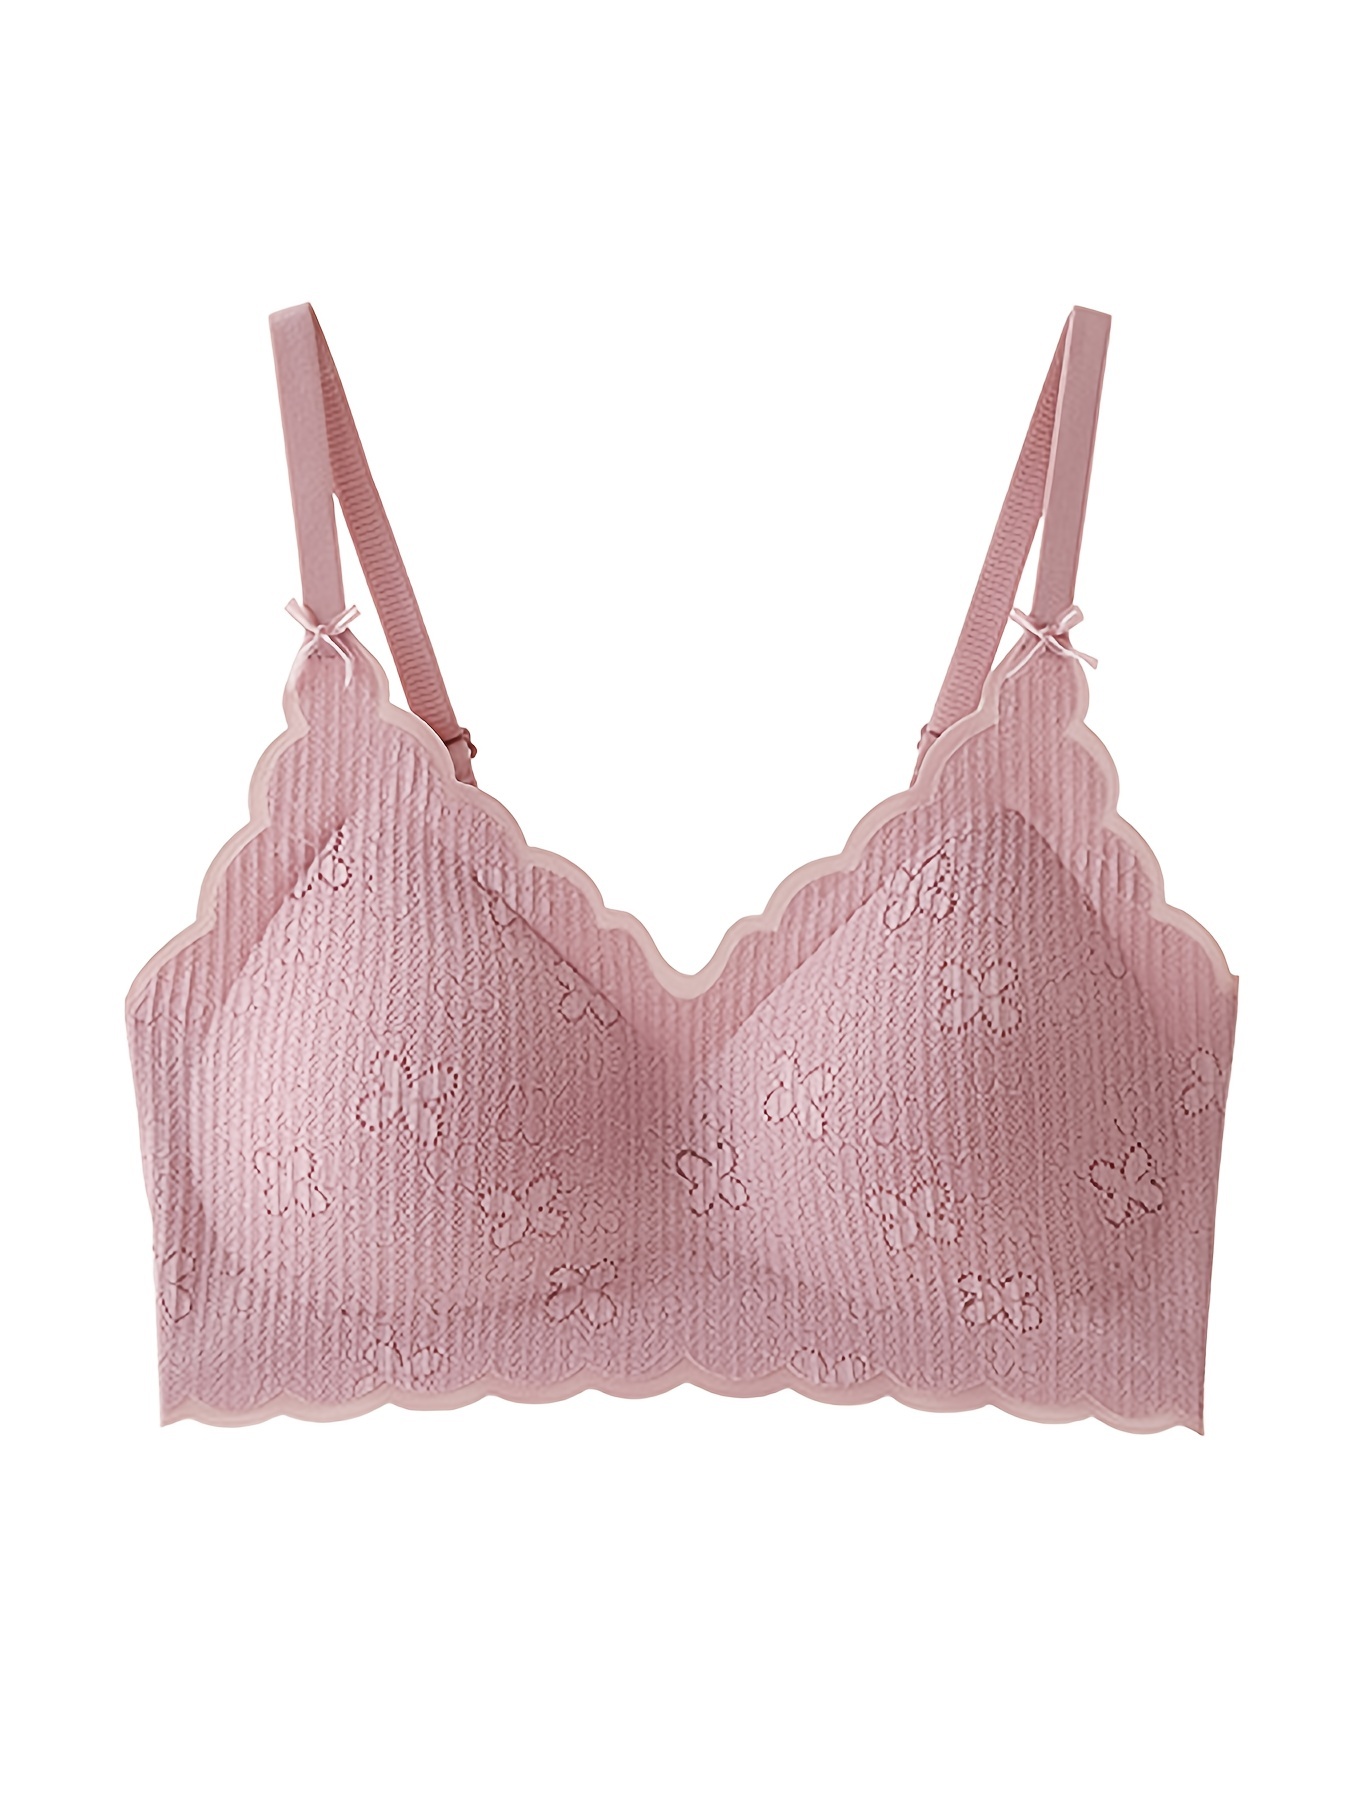  Sweet Curves Wireless Bra, Scalloped Design Natural